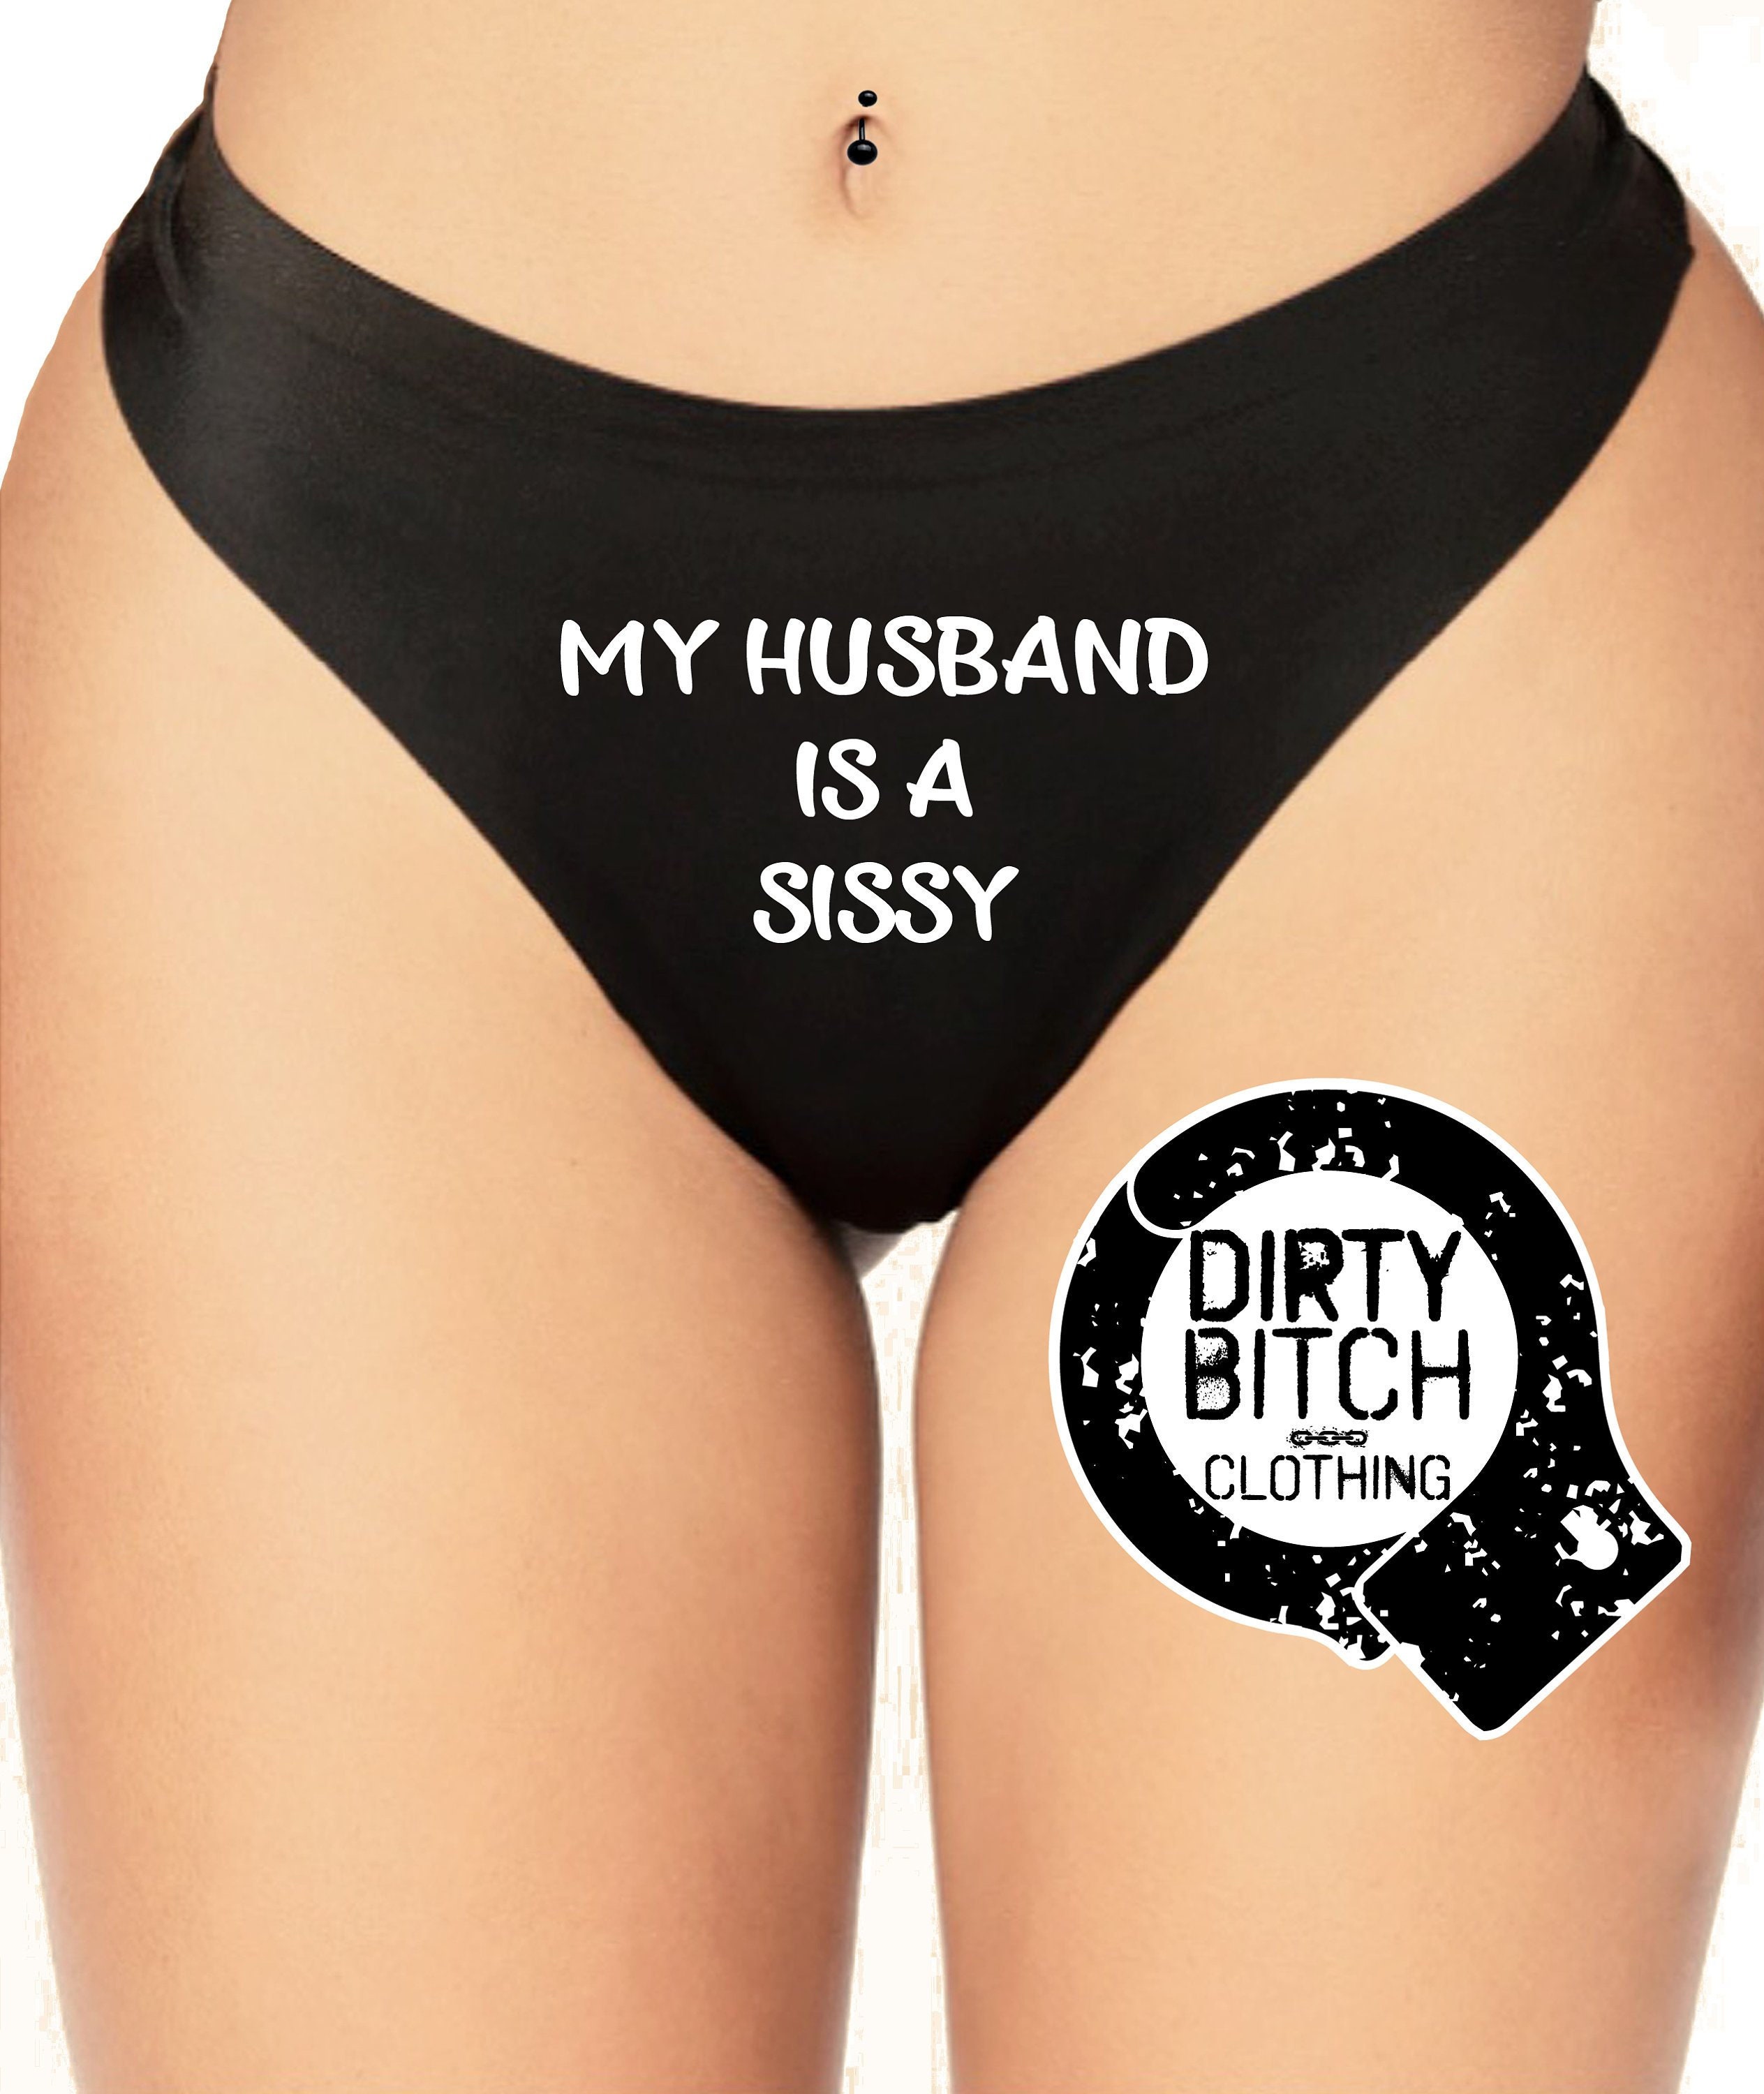 My Husband is A Sissy Adult Knickers Fetish Hotwife image